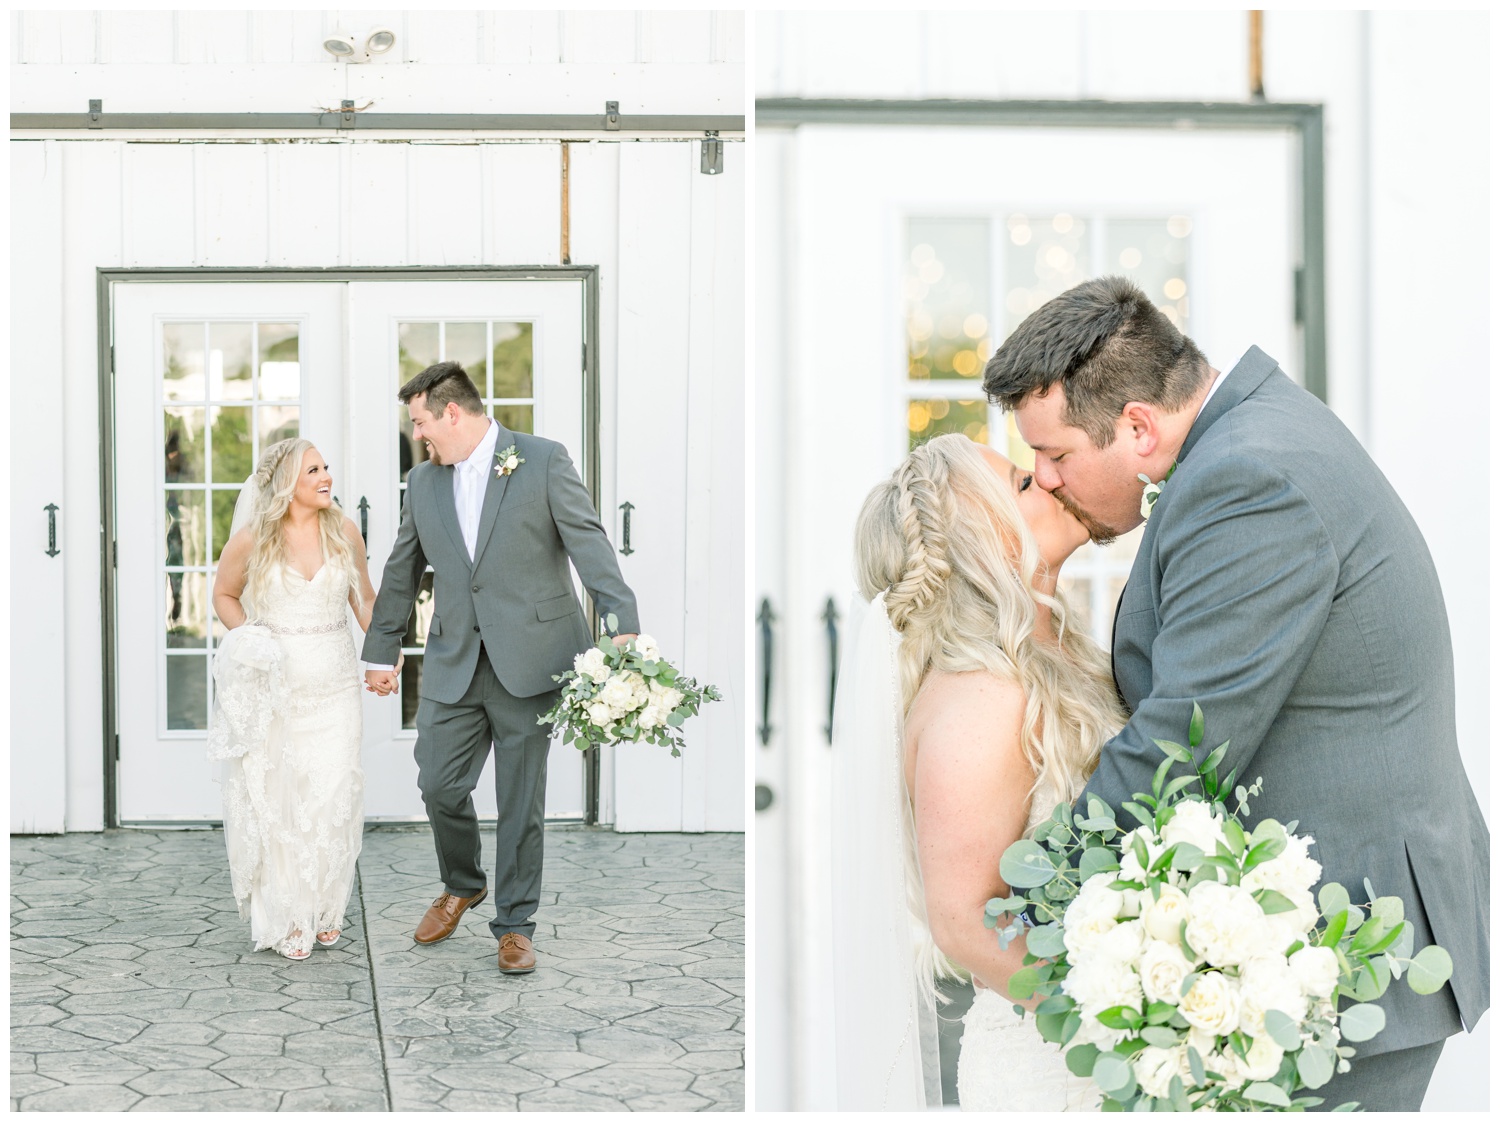 Bride and Groom at White Barn Wedding Venue in Dry Ridge KY